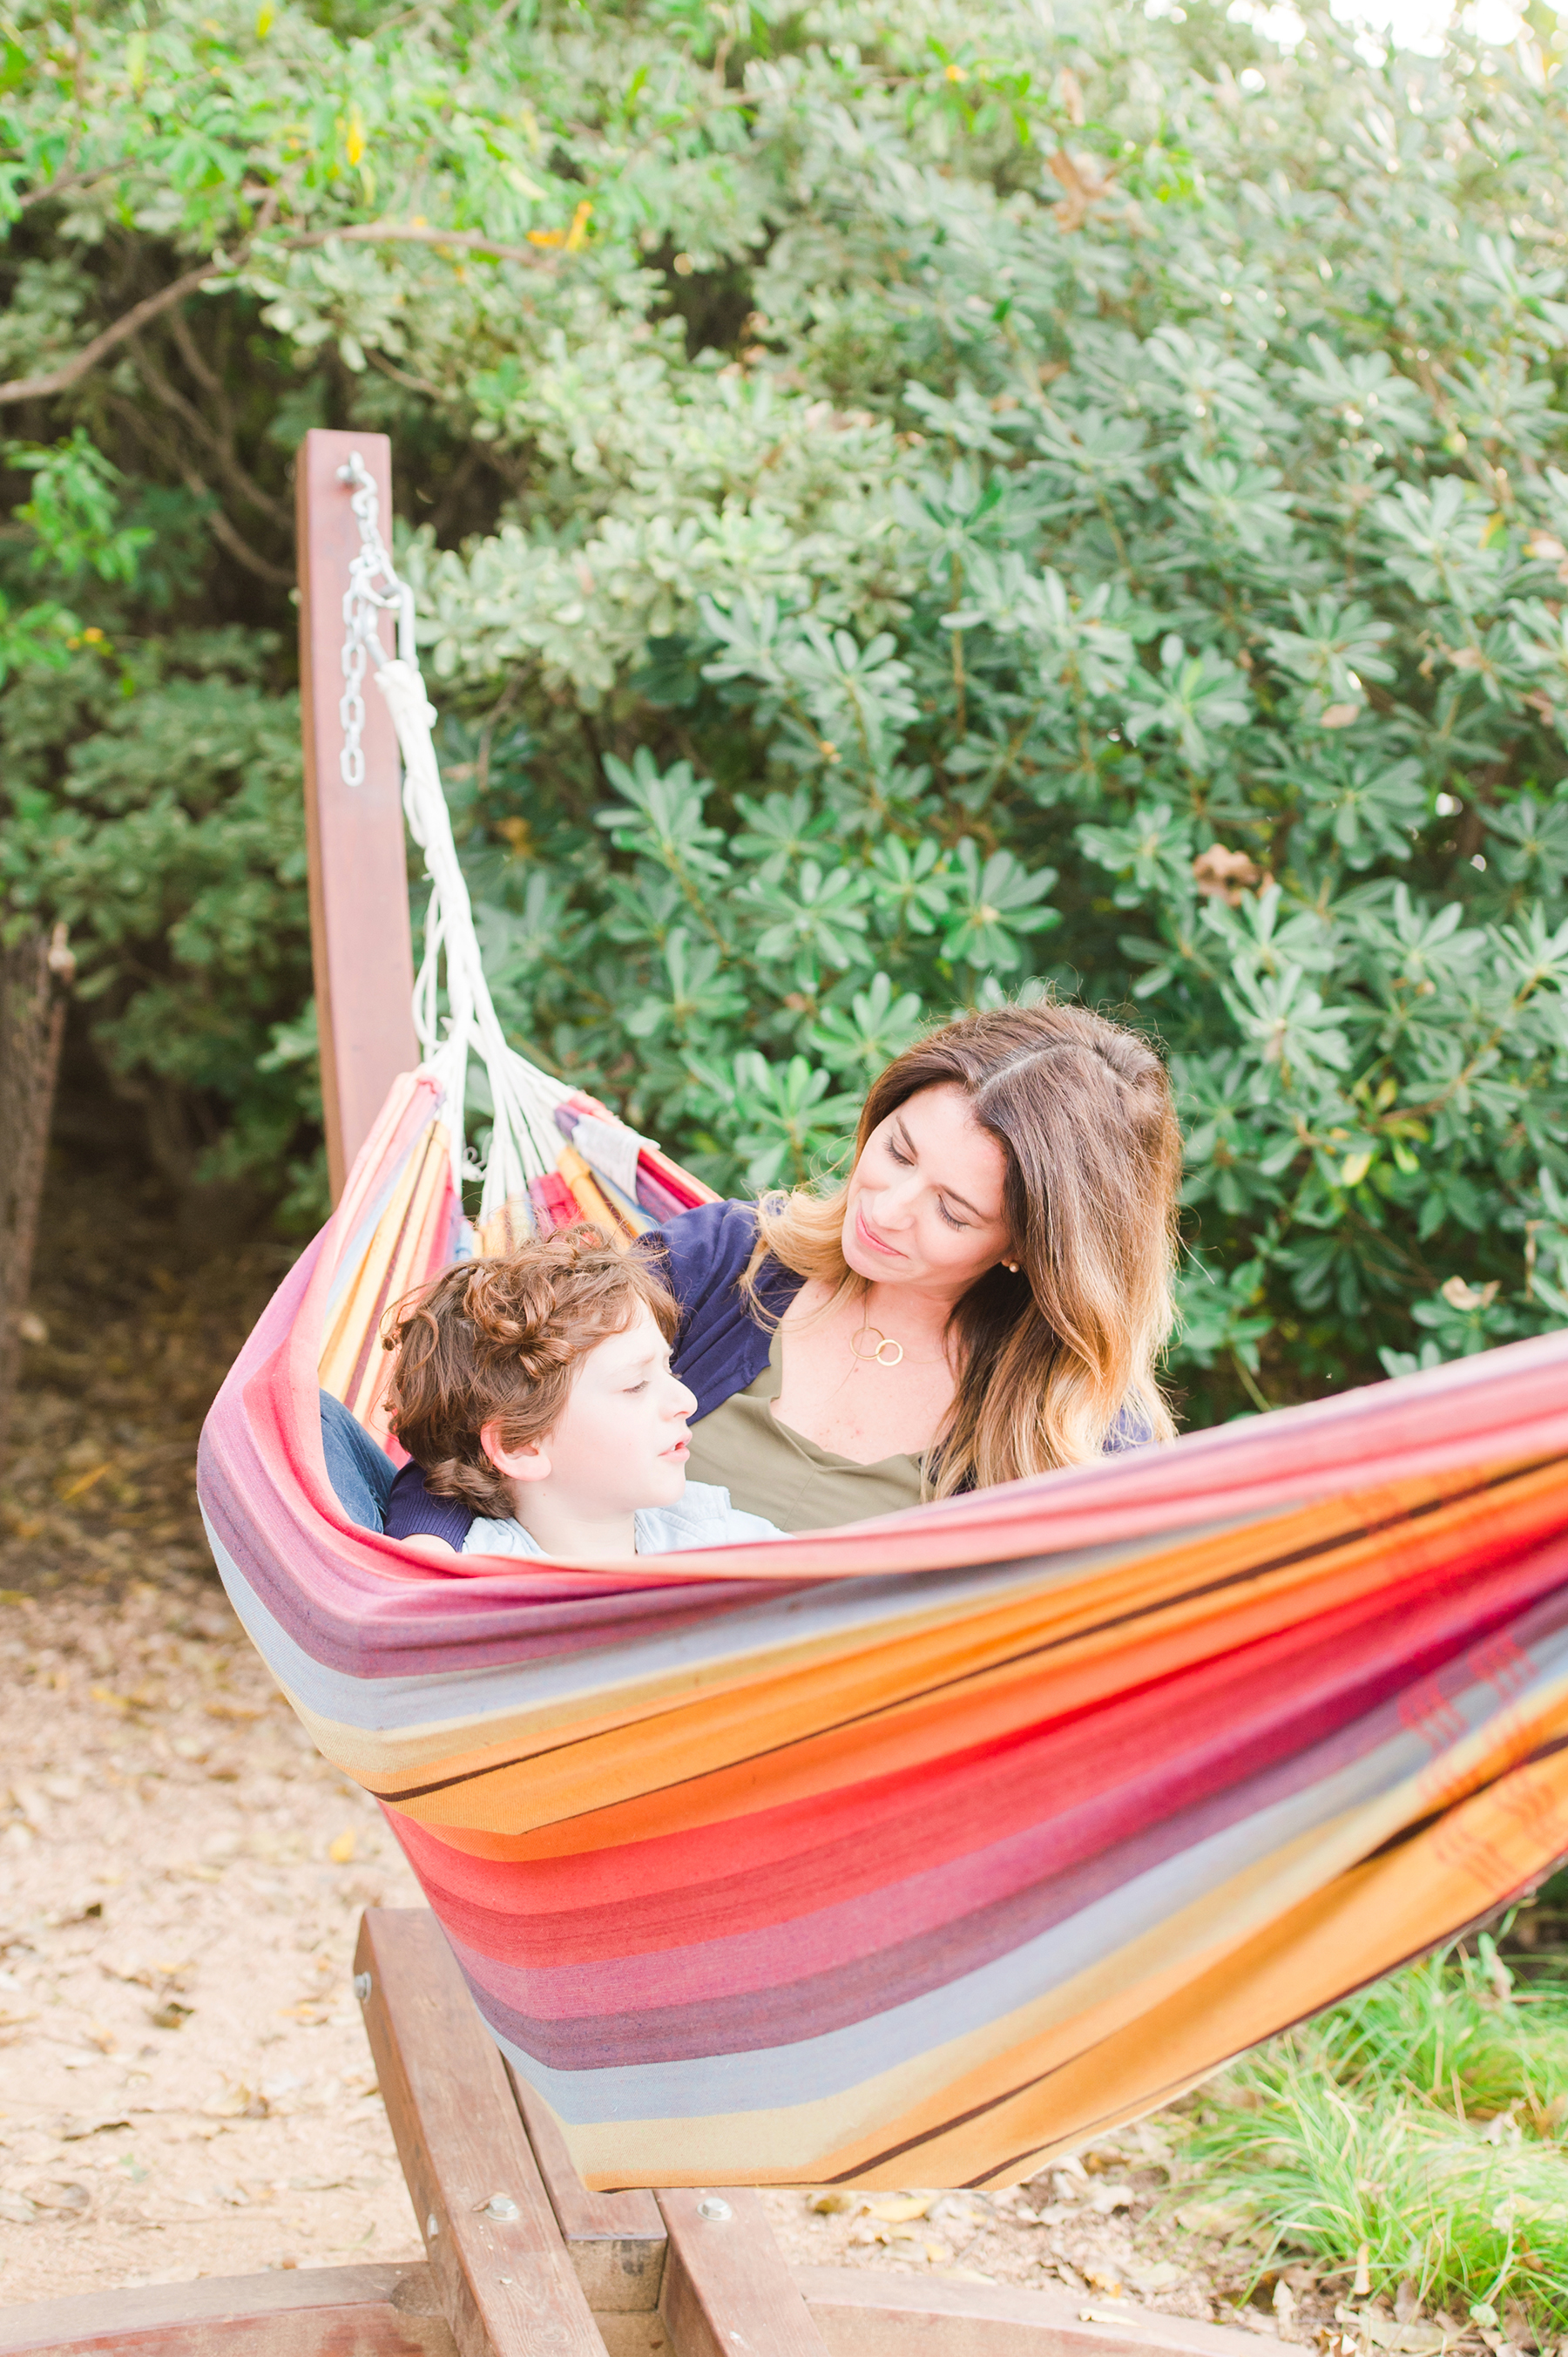 Grant tells mom a story, while they cuddle up in the hammock.